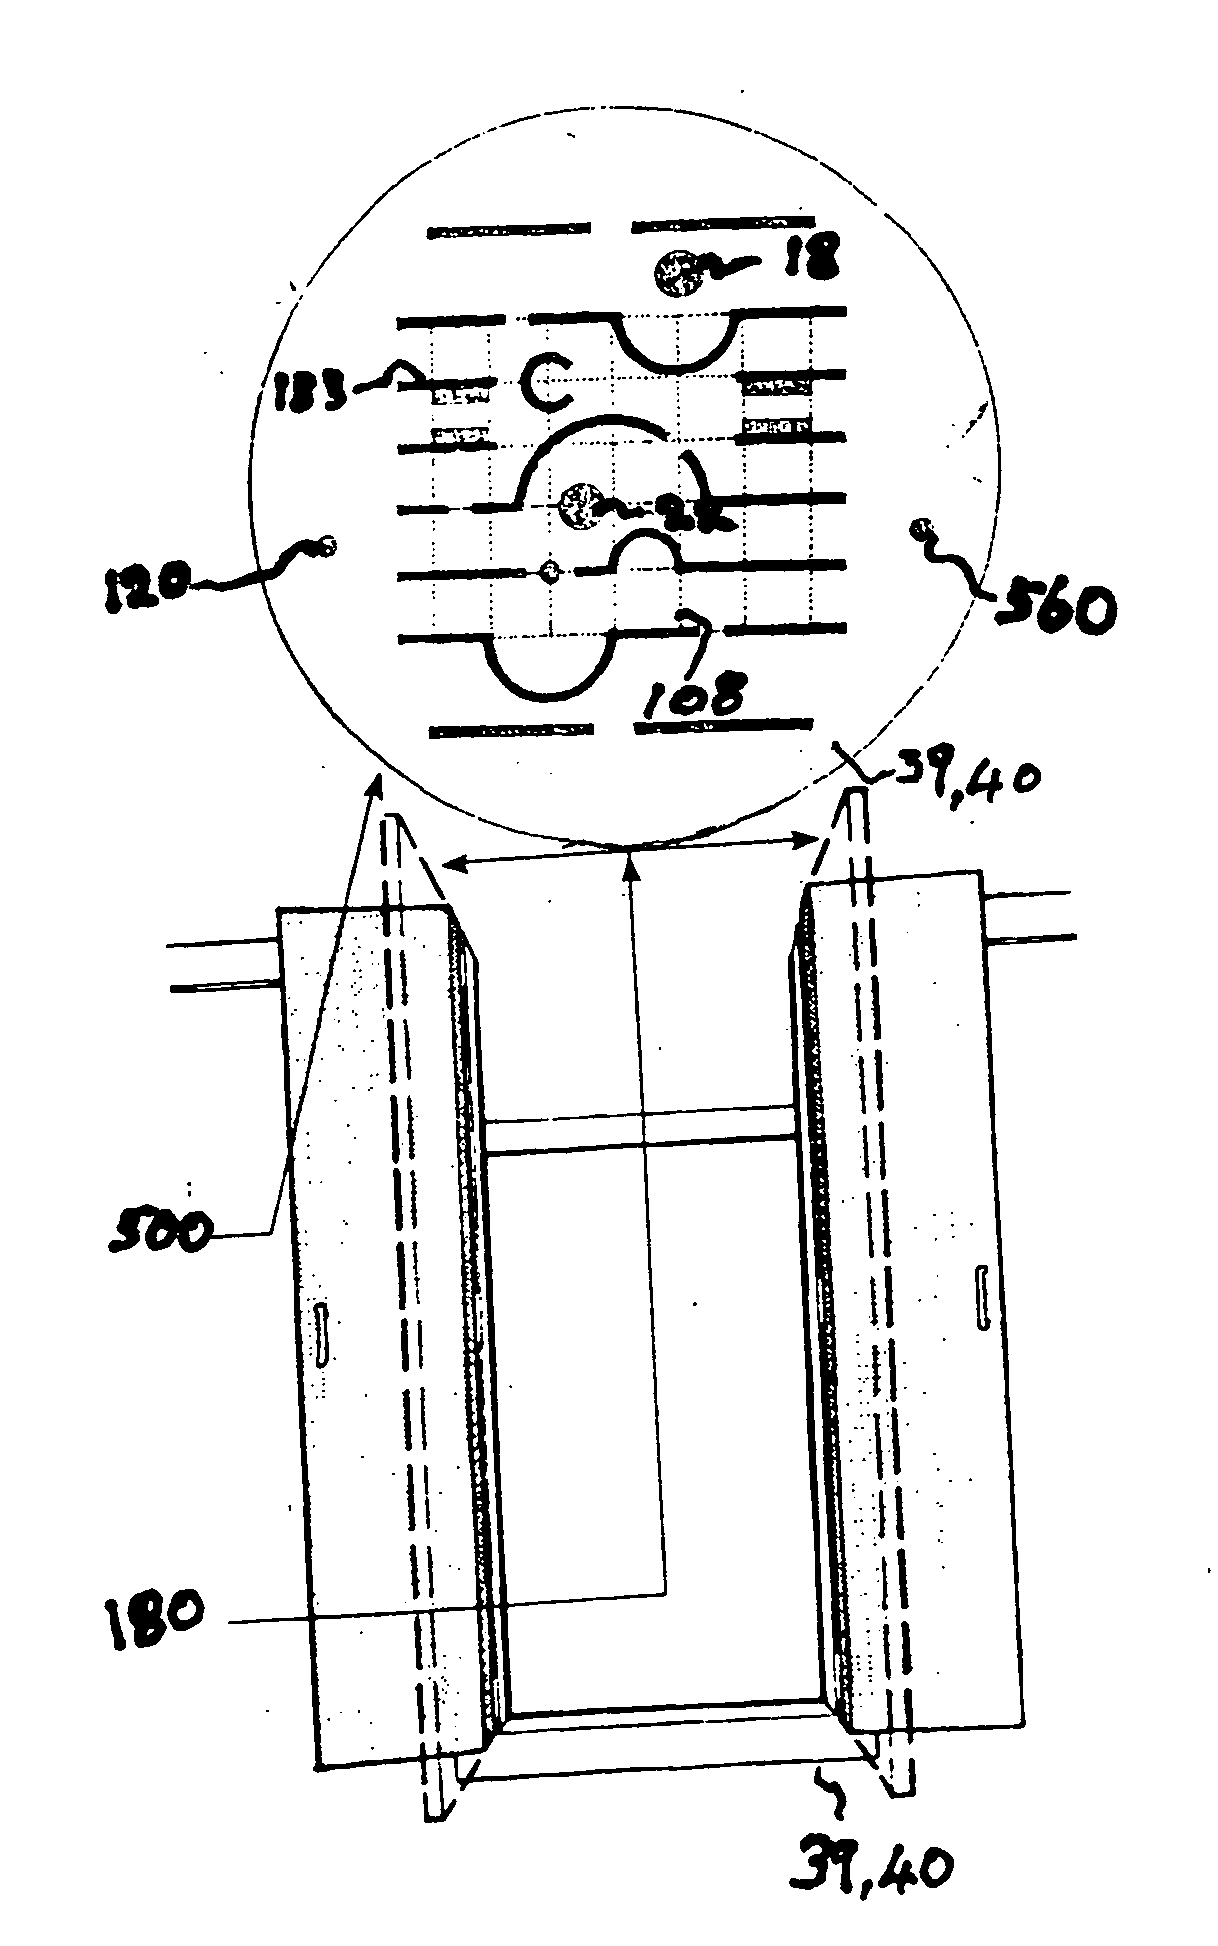 Entertainment device configured for interactive detection and security vigilant monitoring in communication with a control server